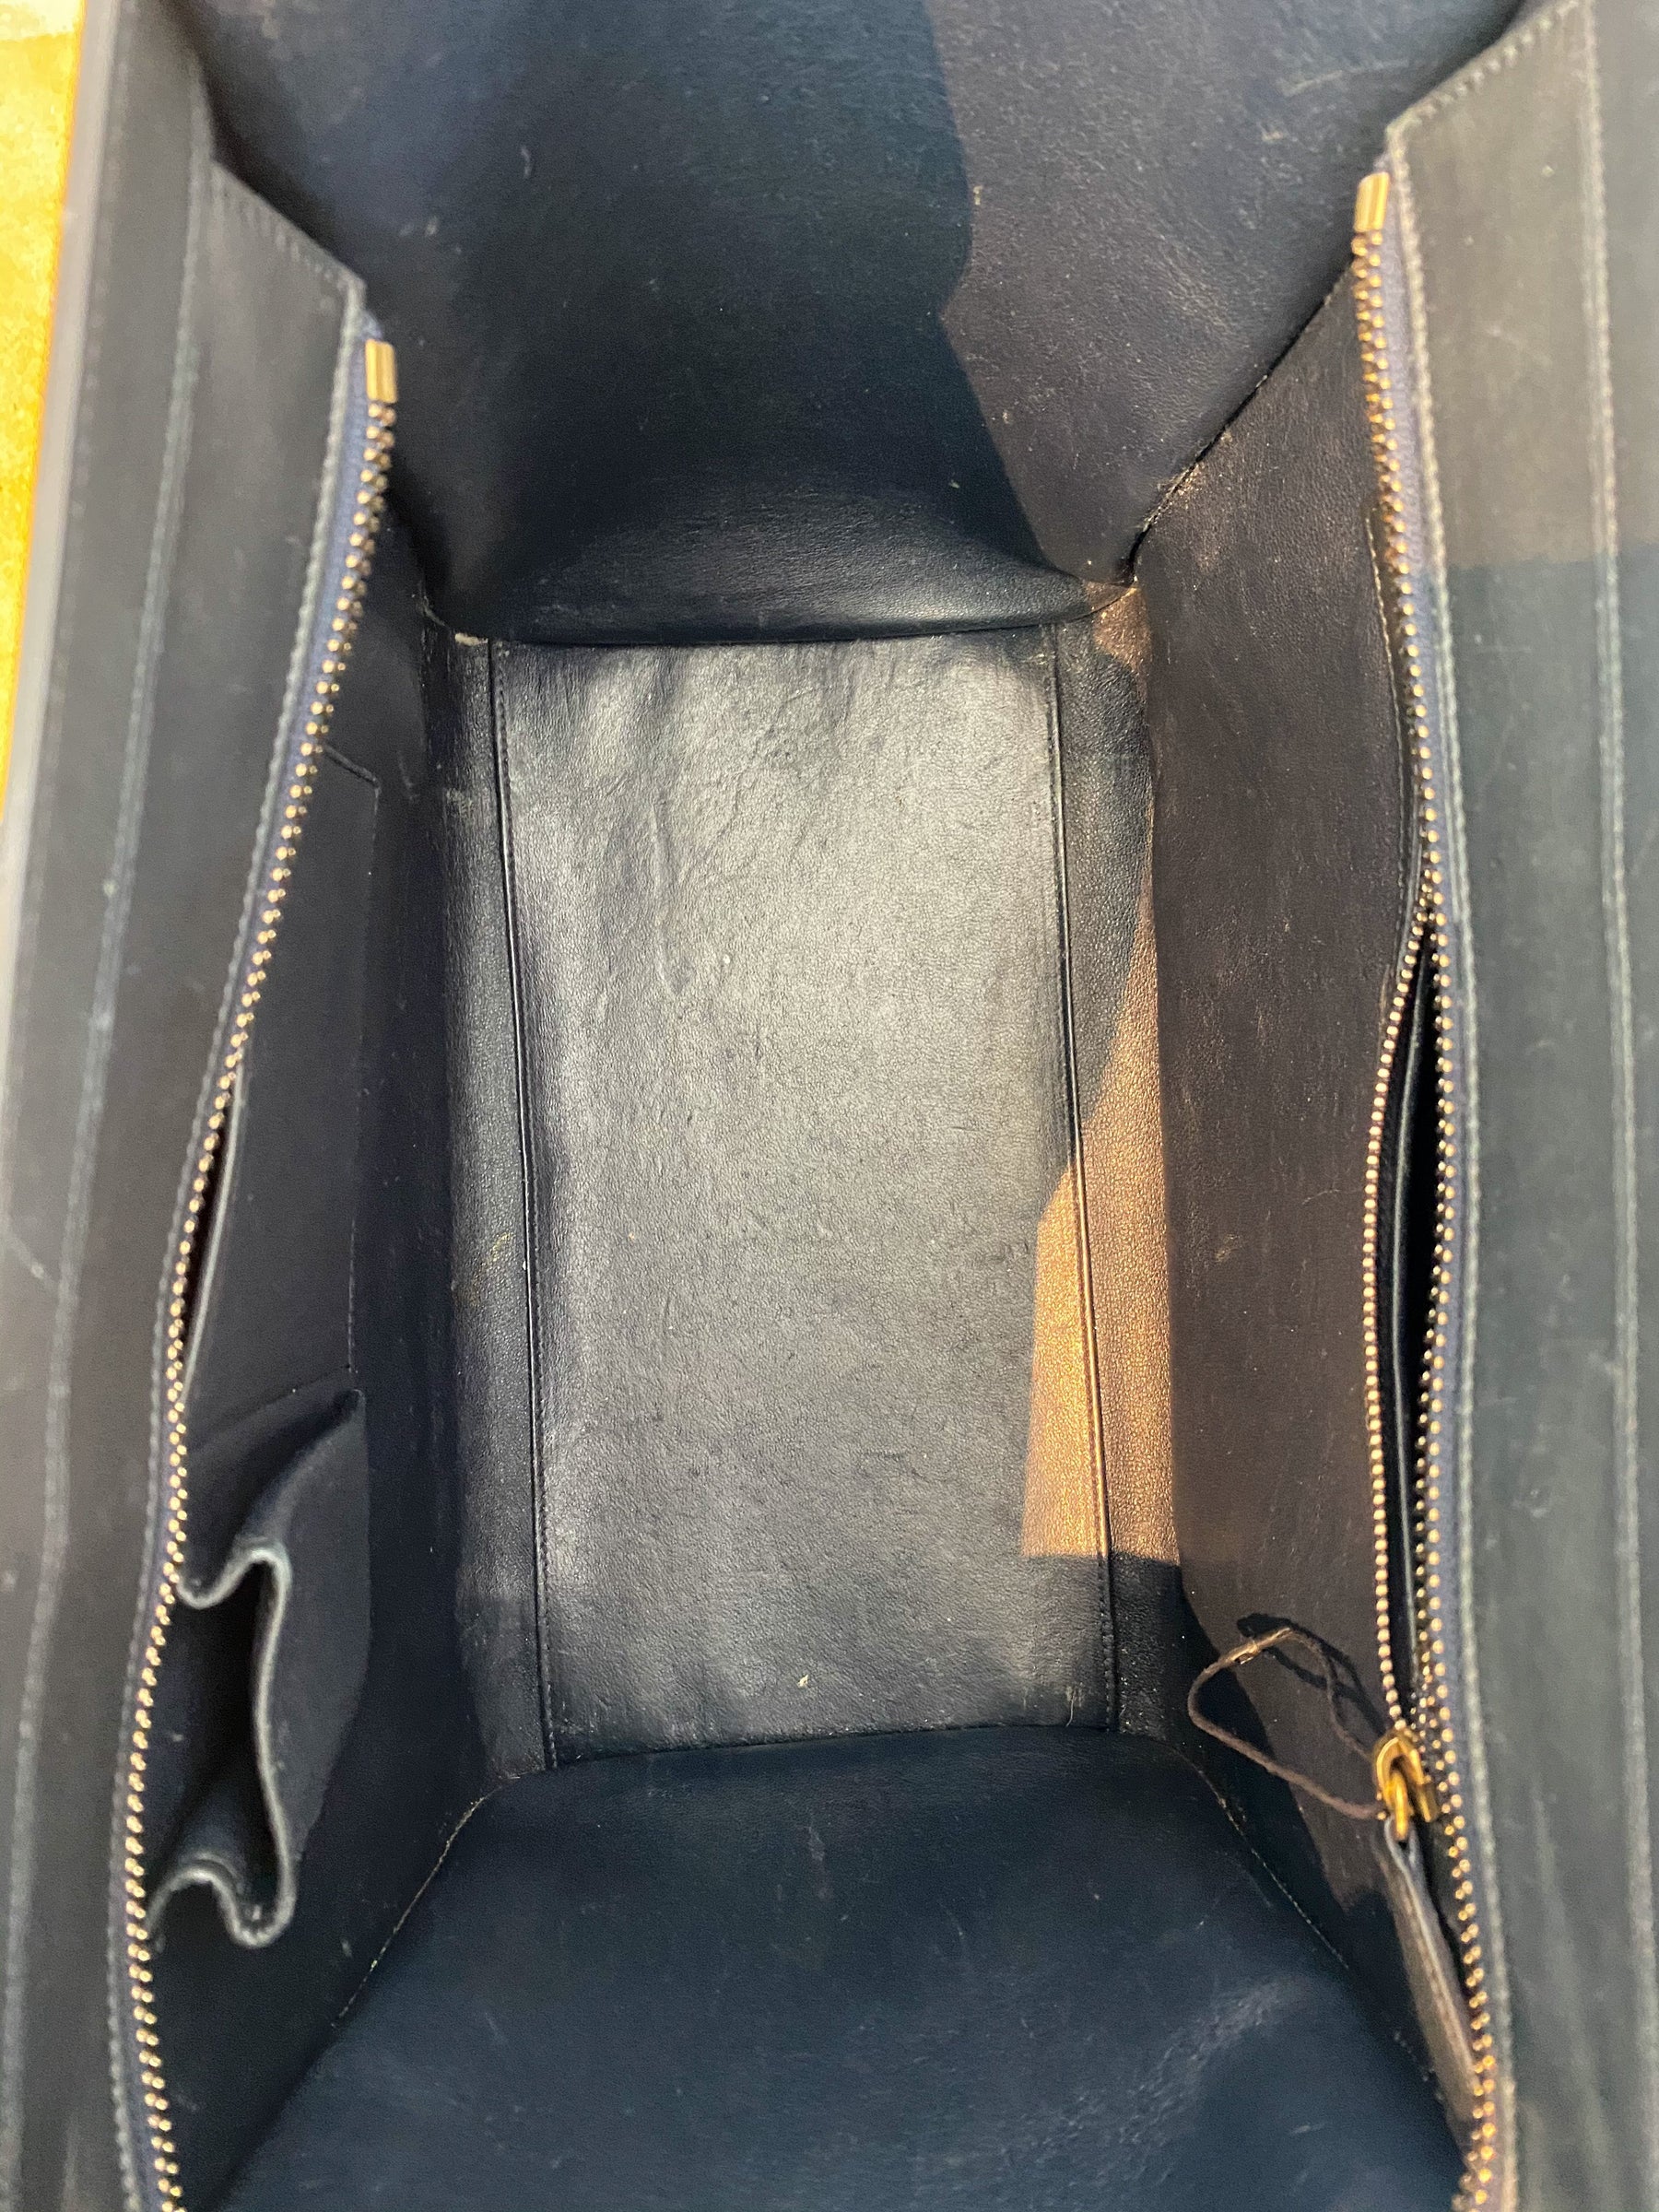 Celine Luggage Tote Mini Black and Blue Inside of Bag Featuring Inside pockets and Zipper Closure